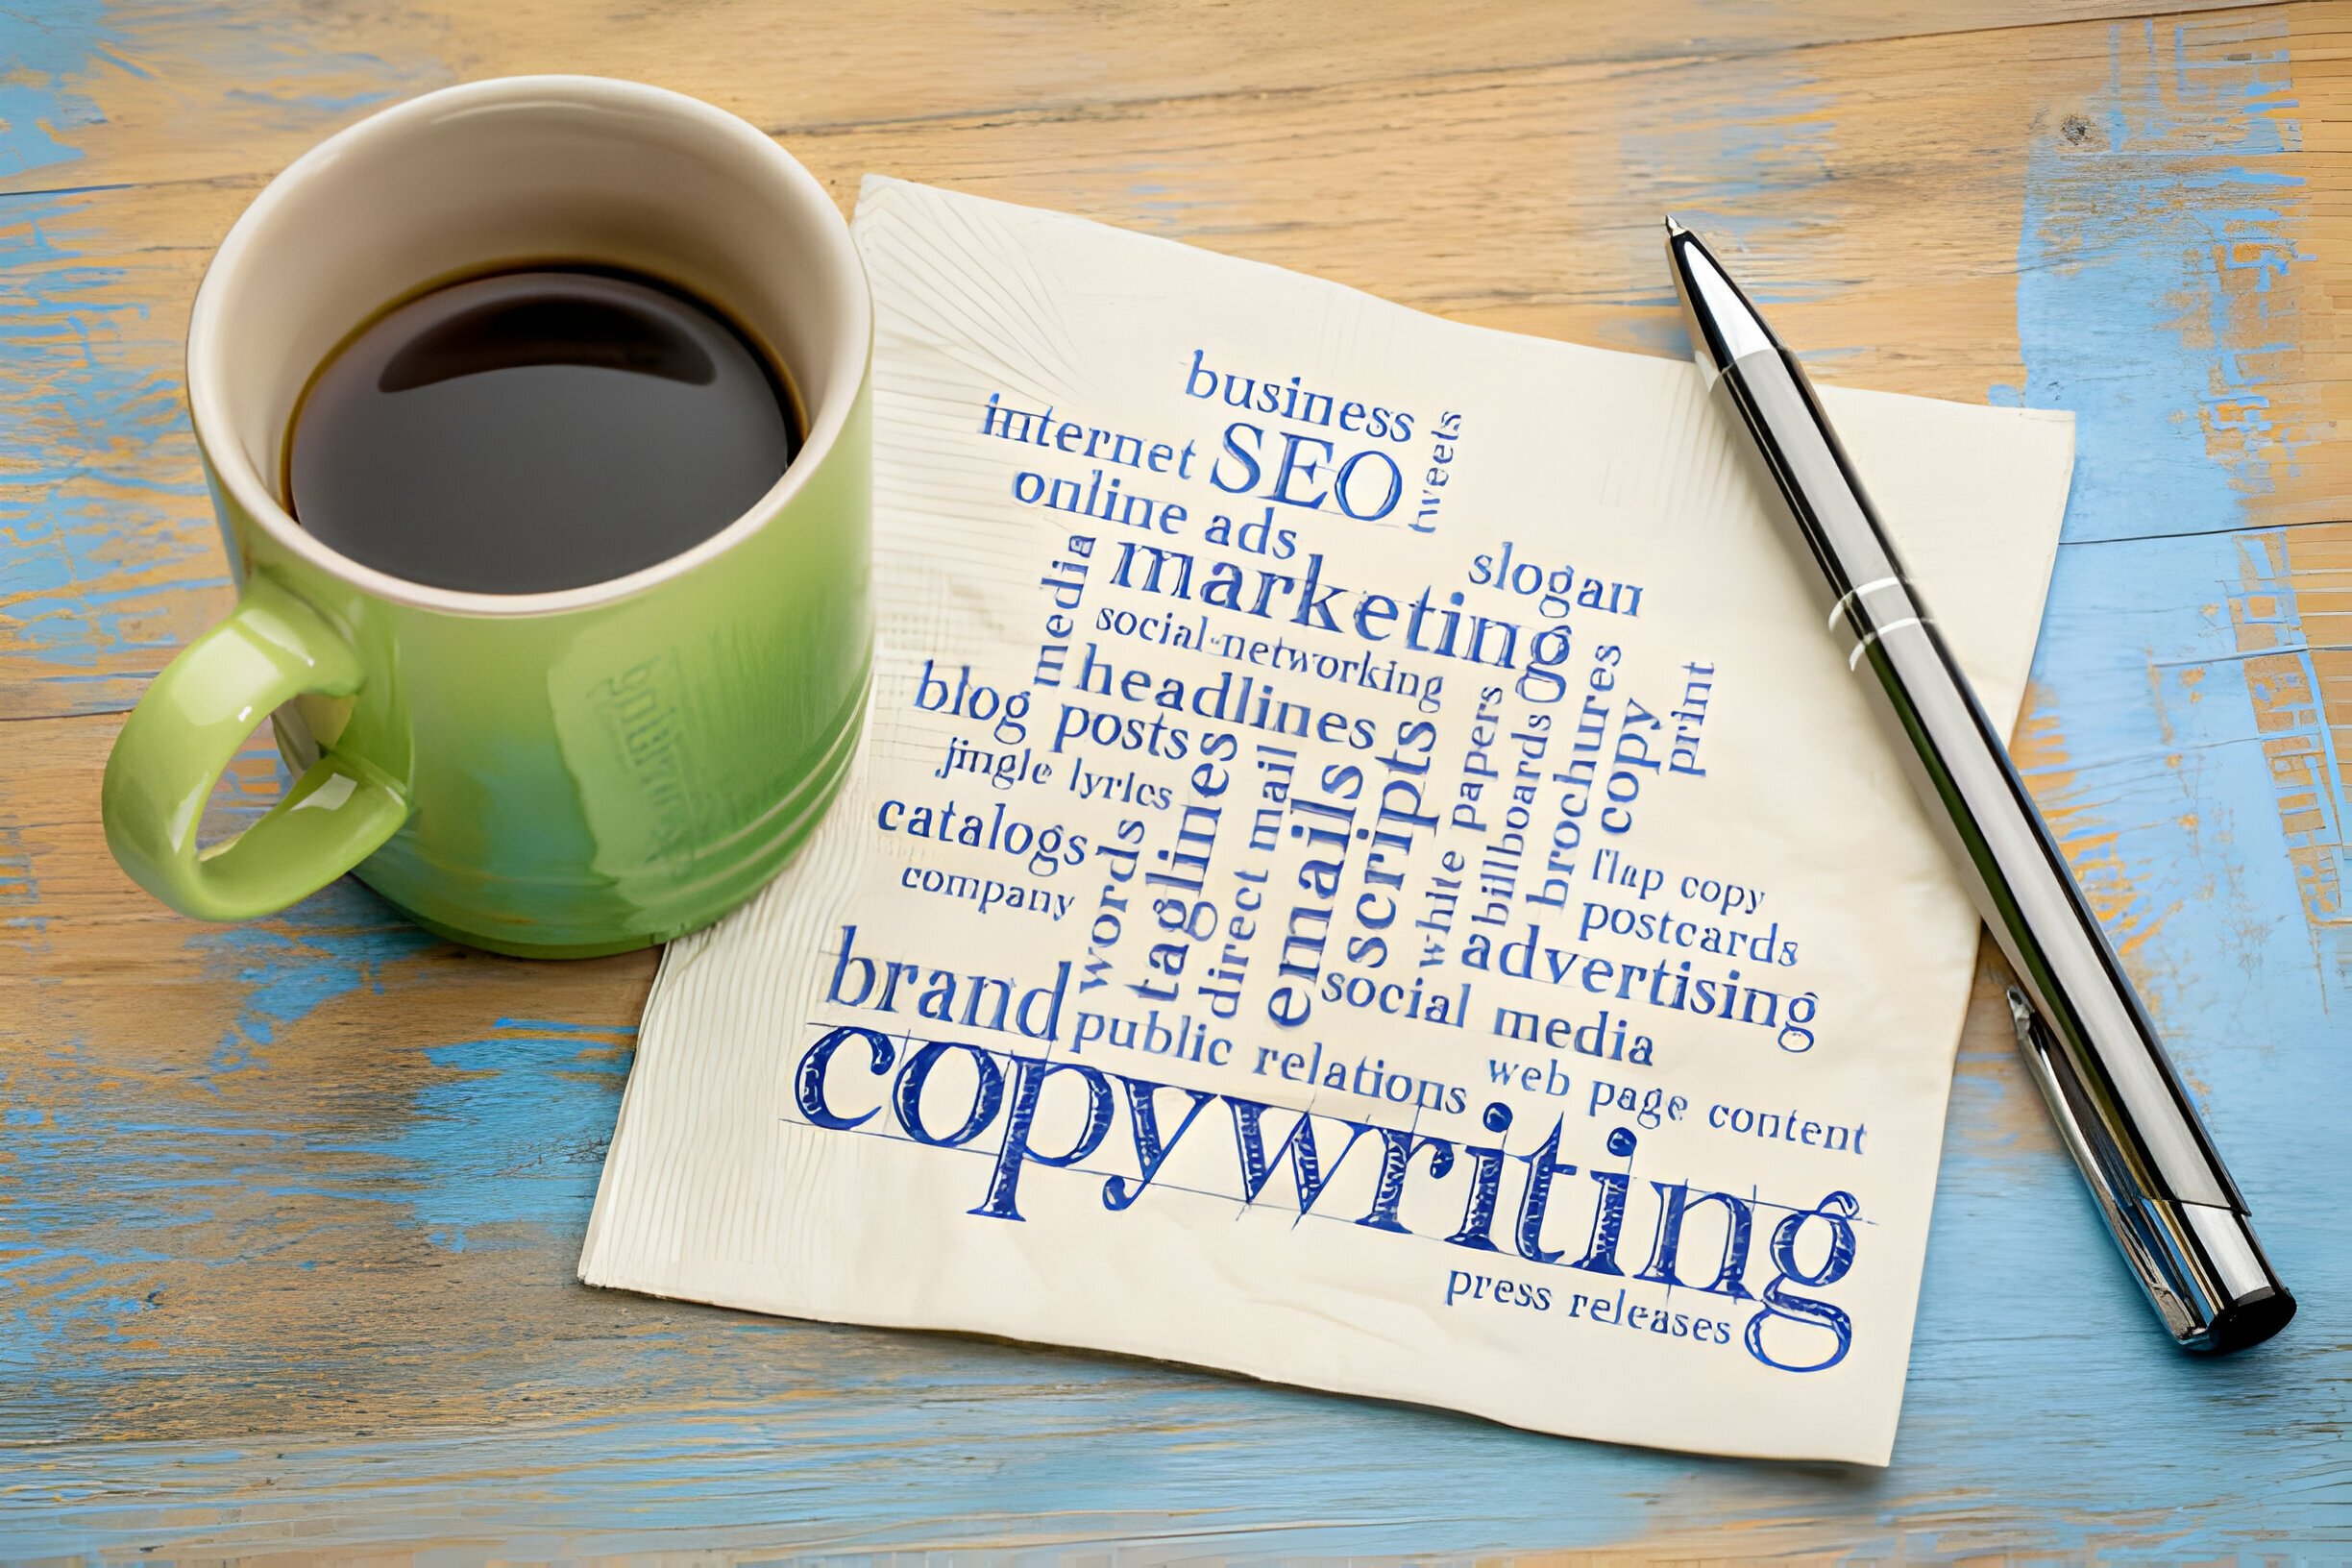 tools and resources to create compelling content for copywriting